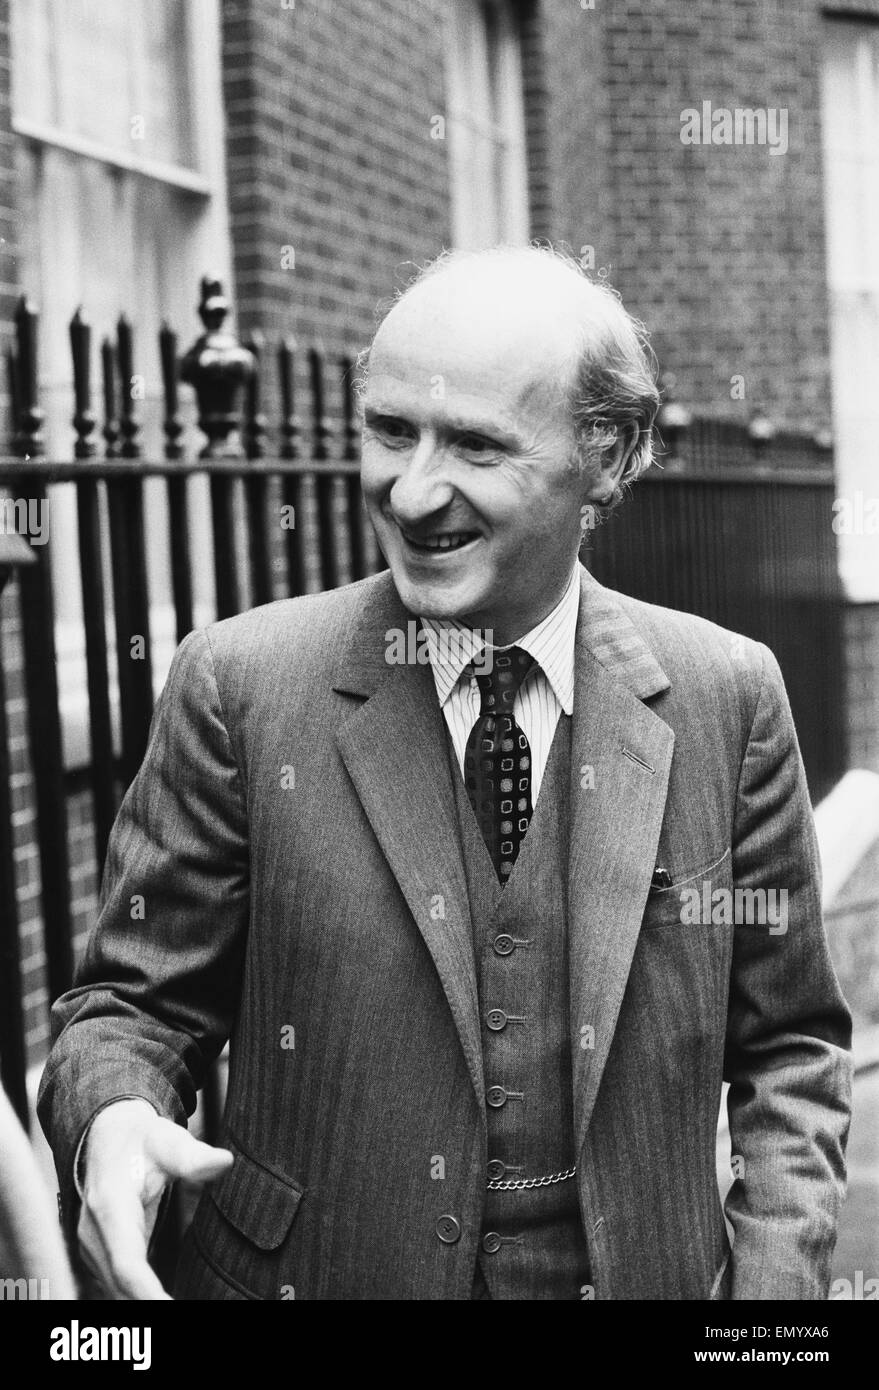 Chancellor of the Exchequer Anthony Barber goes for a short walk into the Minister's Courtyard prior to leaving number 11 Downing Street for the House of Commons to deliver his budget speech. 6th March 1973. Stock Photo